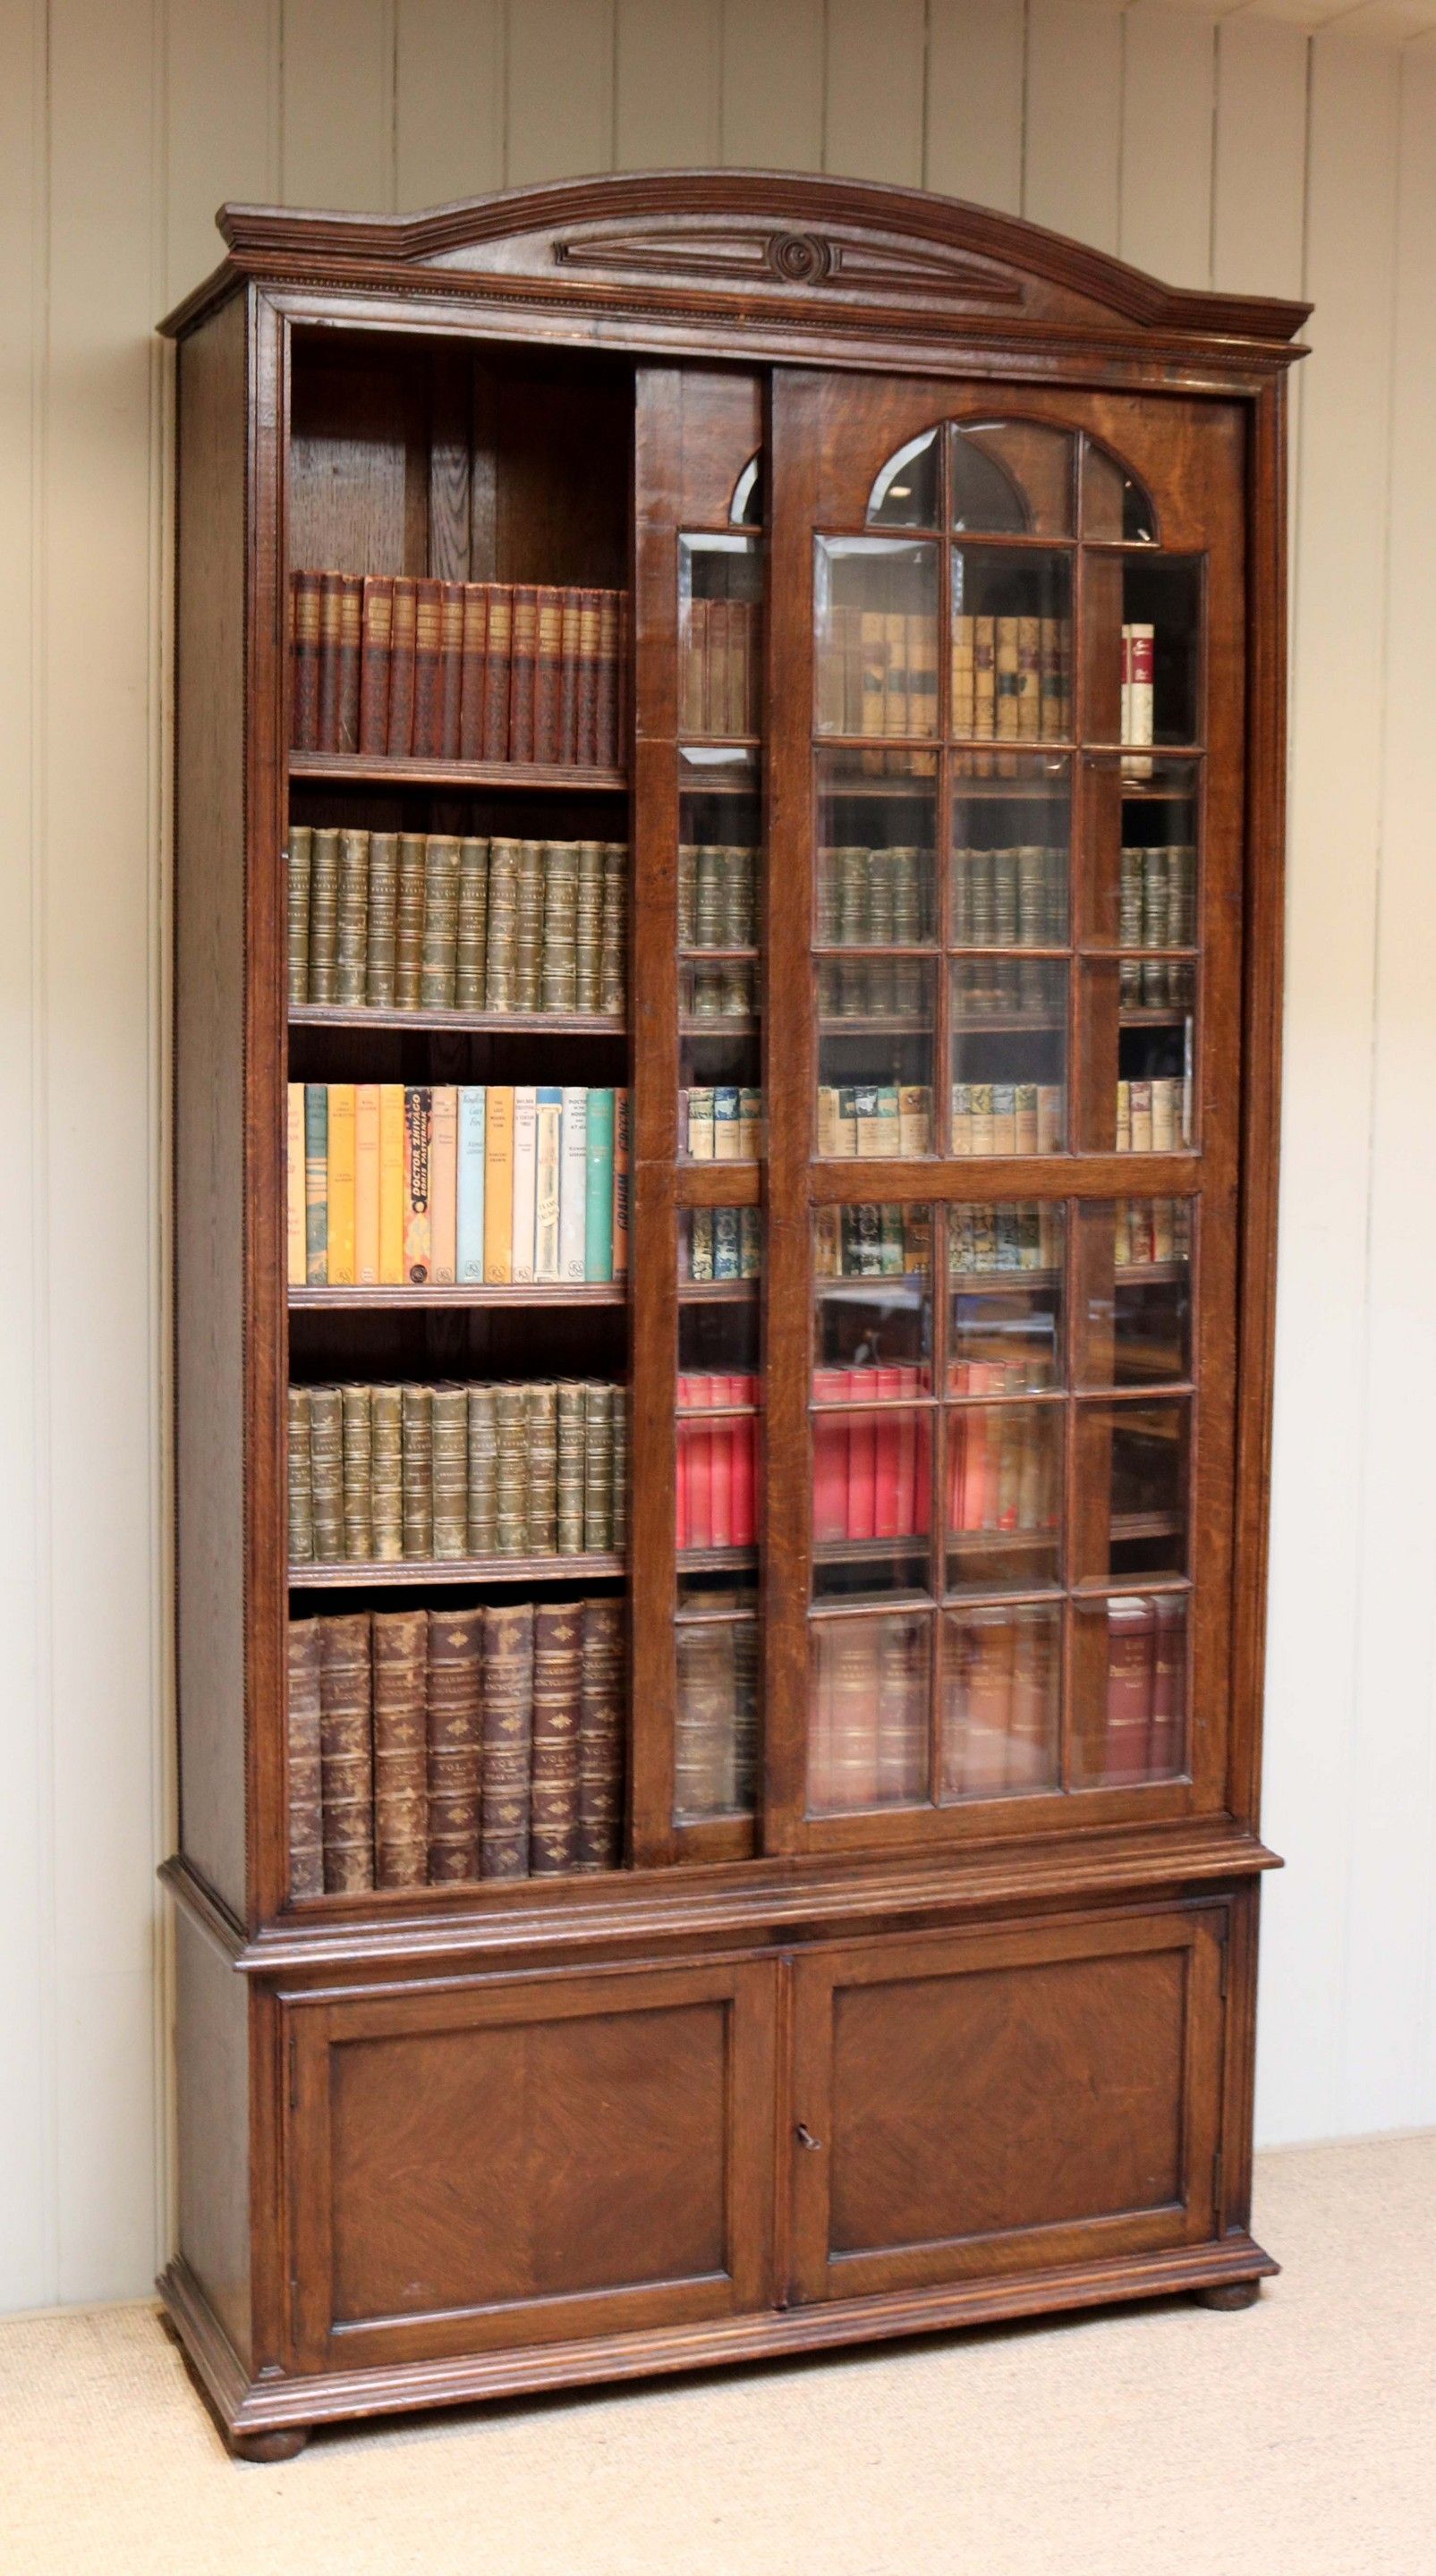 Solid Oak Glazed Bookcase C 1910 England From Worboys Antiques Intended For Oak Glazed Bookcase (View 15 of 15)